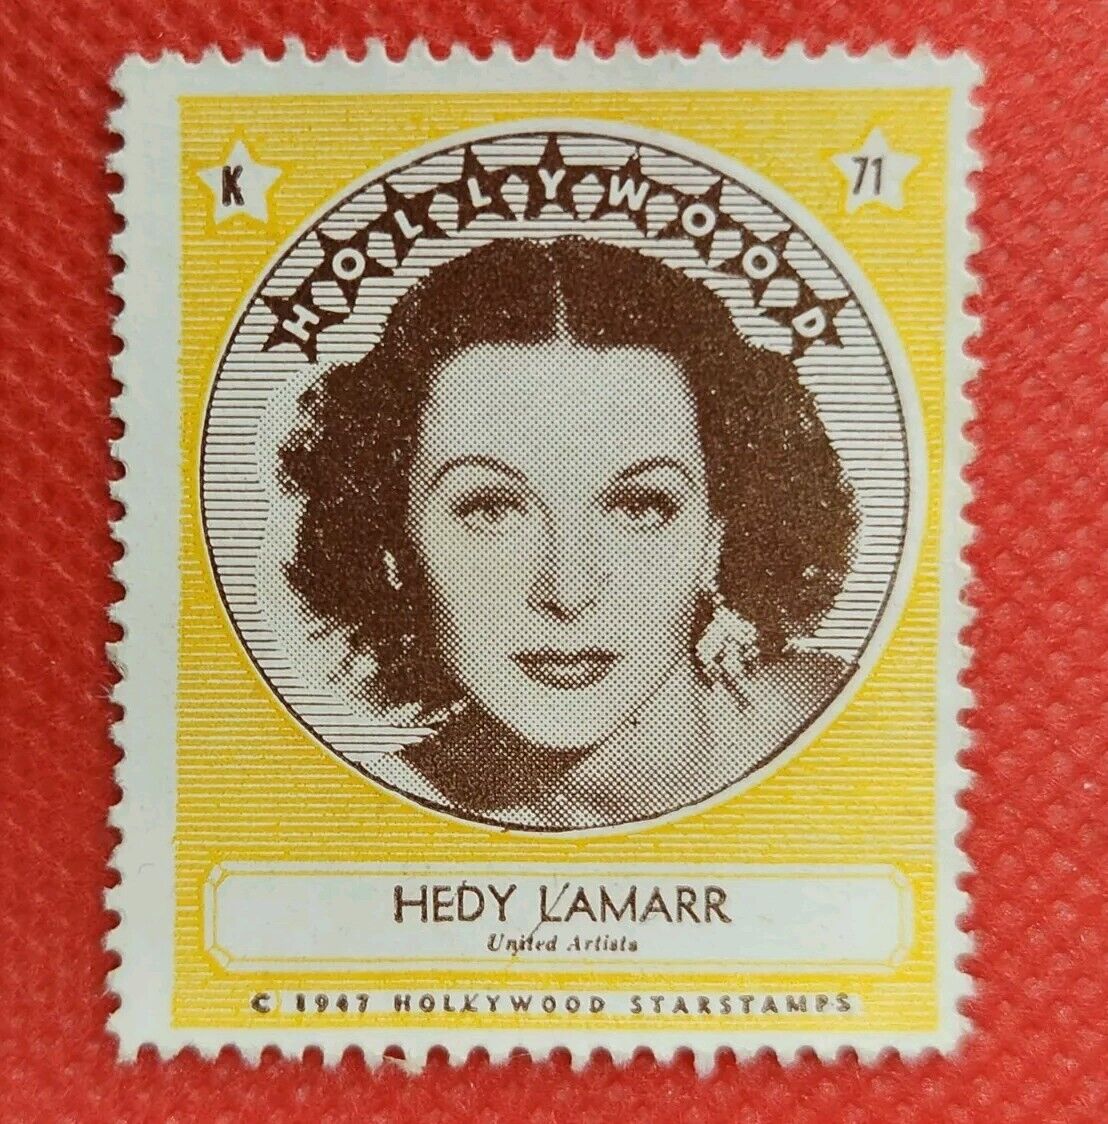 Hedy Lamarr 1947 Hollywood Screen Movie Stars Stamp Trading Card